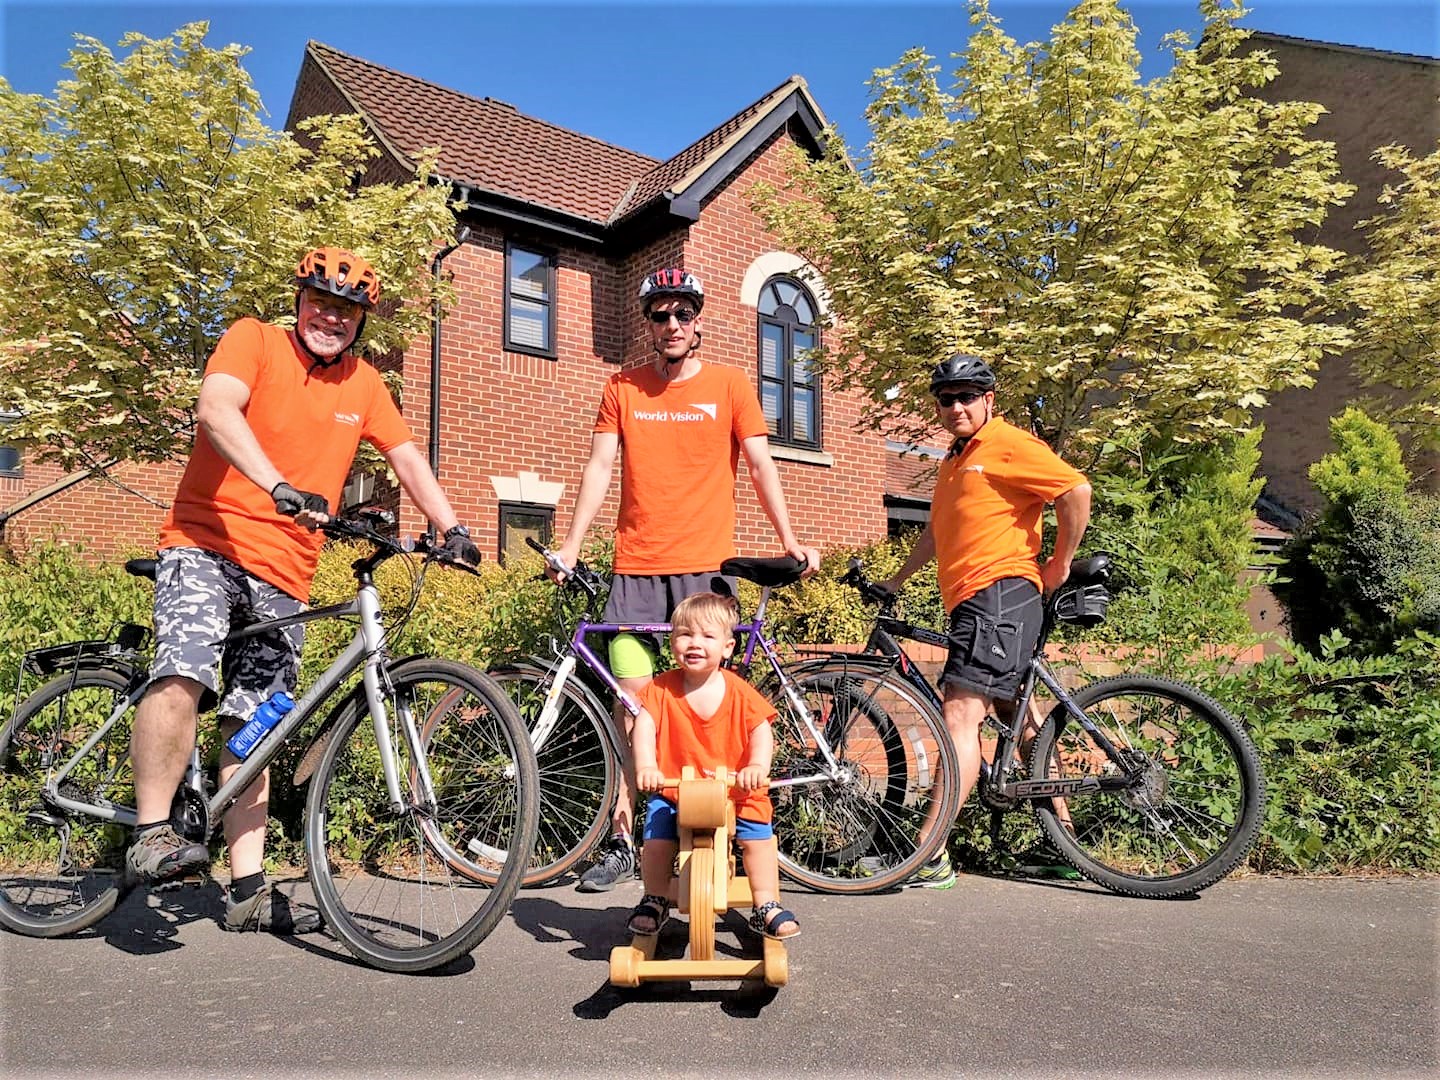 UK family of four pose with bicycles in orange t-shirts to raise funds to protect children from COVID-19